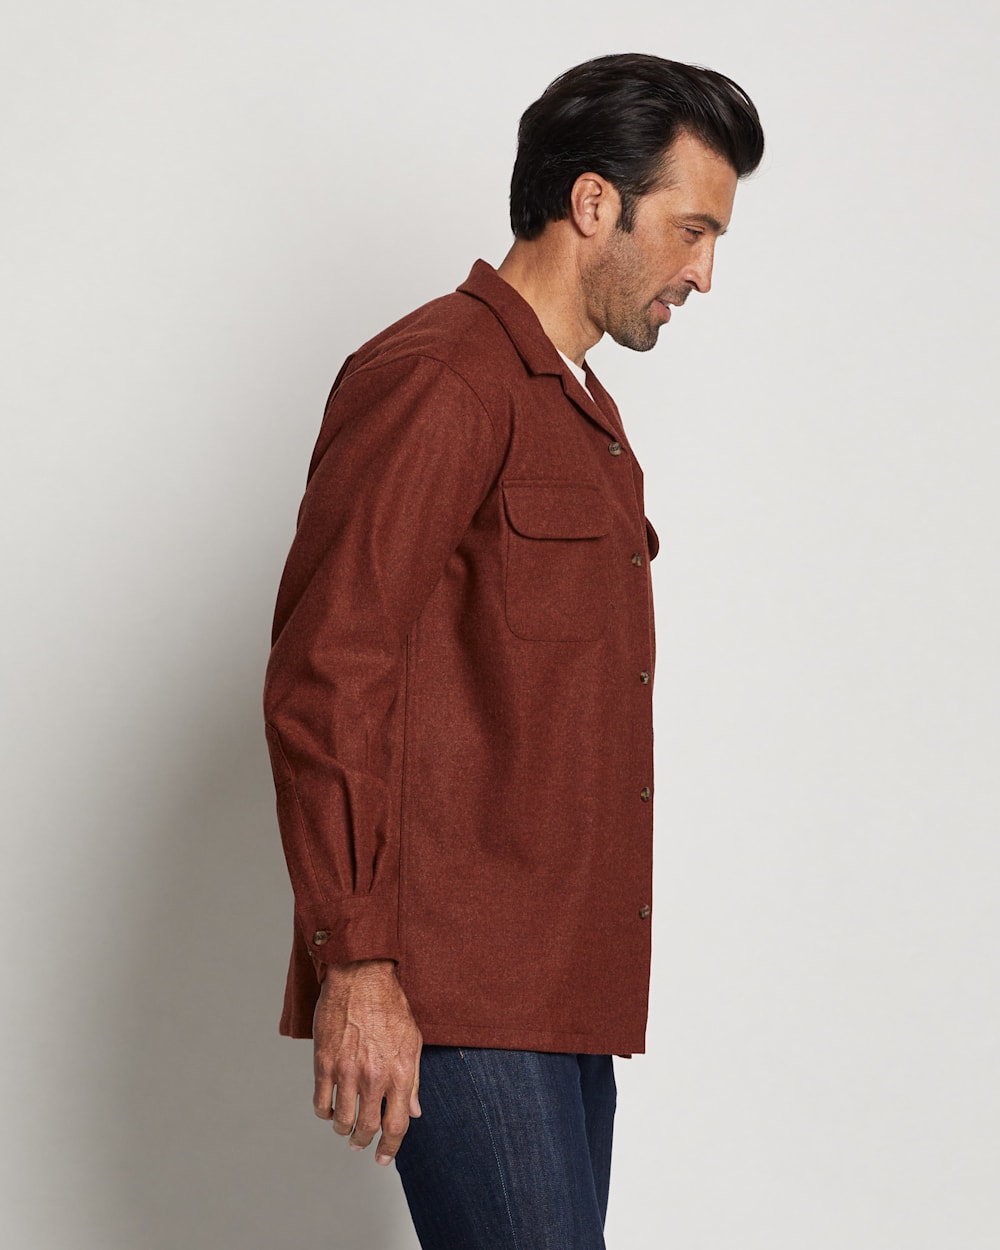 ALTERNATE VIEW OF MEN'S BOARD SHIRT IN RED MIX image number 4